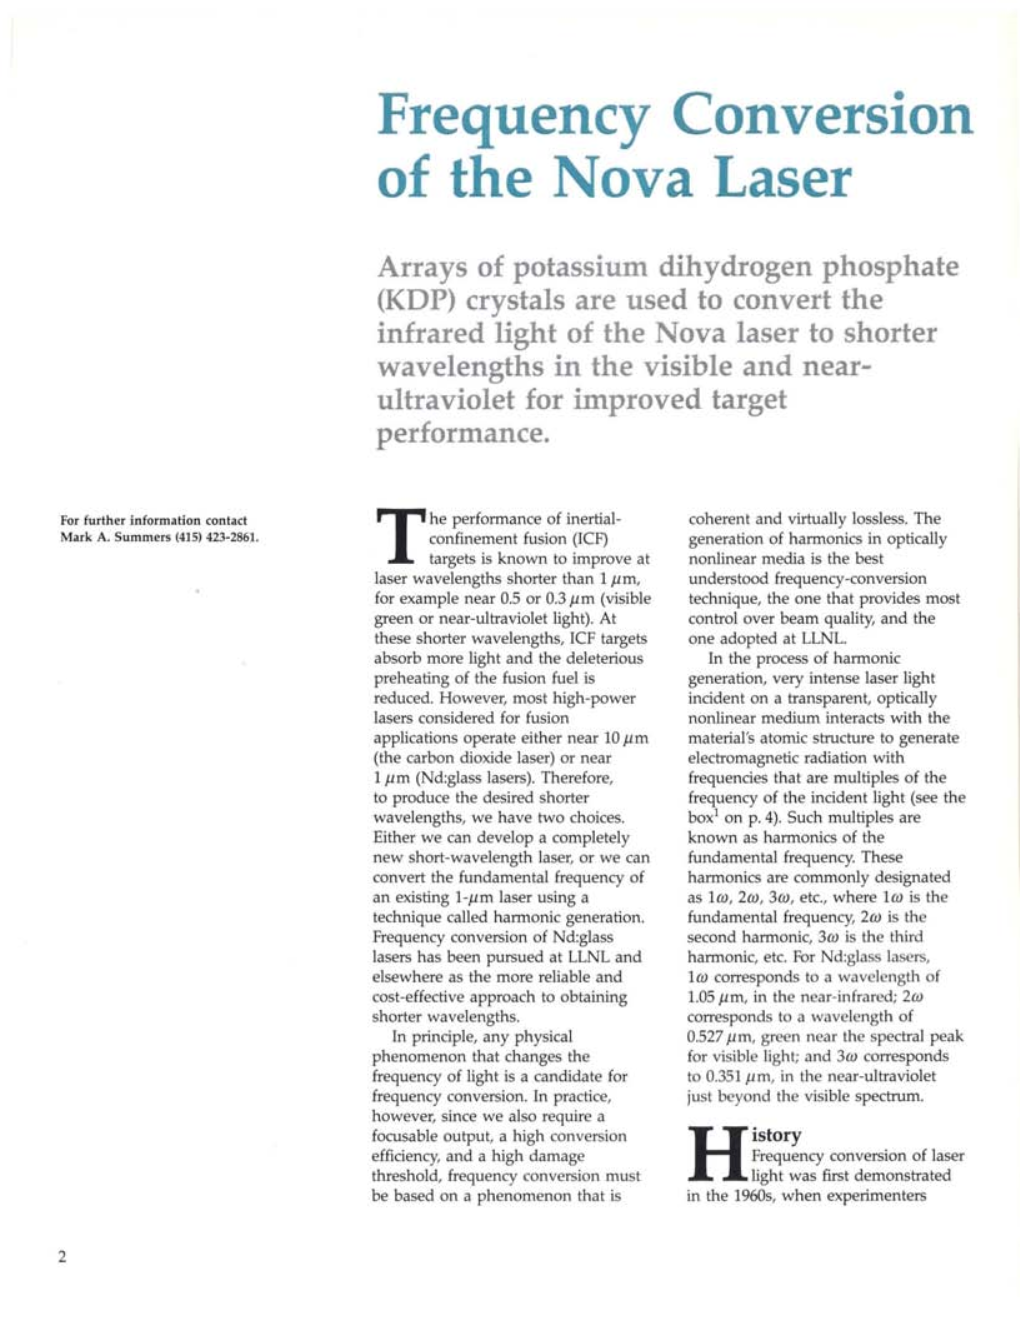 Frequency Conversion of the Nova Laser